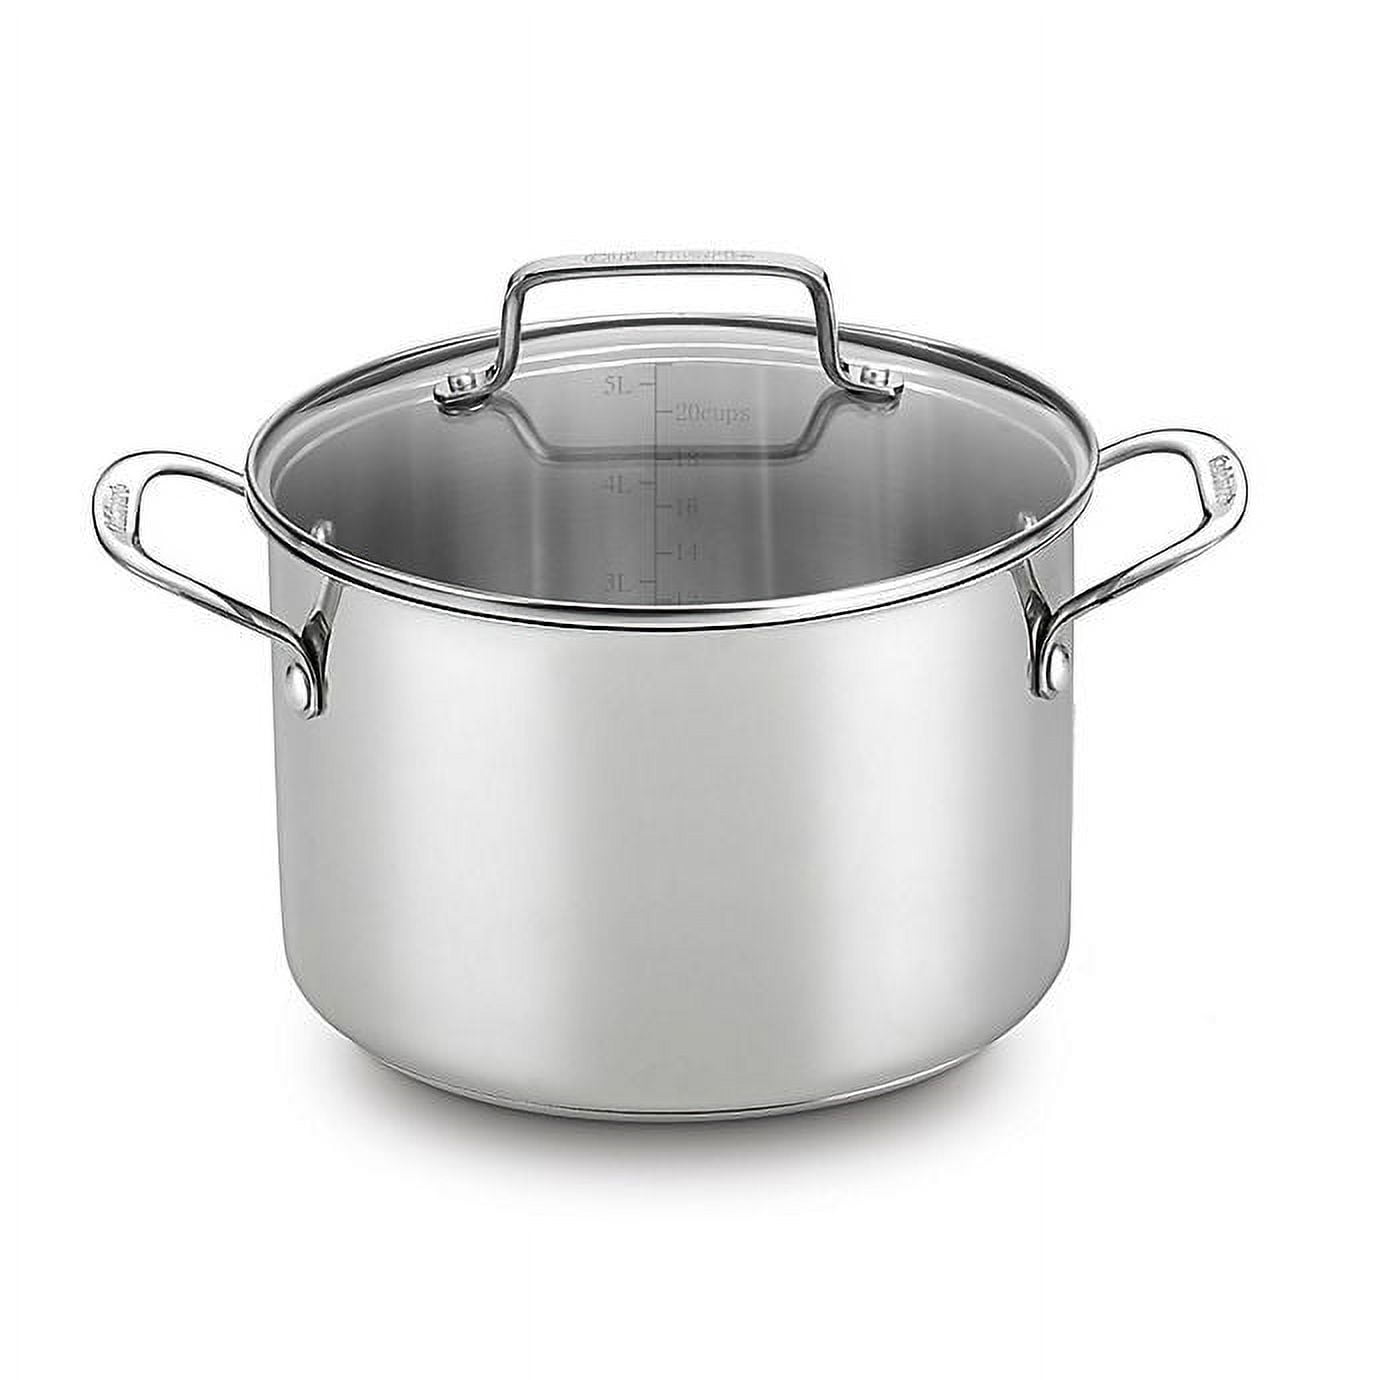 Cuisinart Chef's Classic Stainless Steel 6-Qt. Pasta Pot with Straining  Cover + Reviews